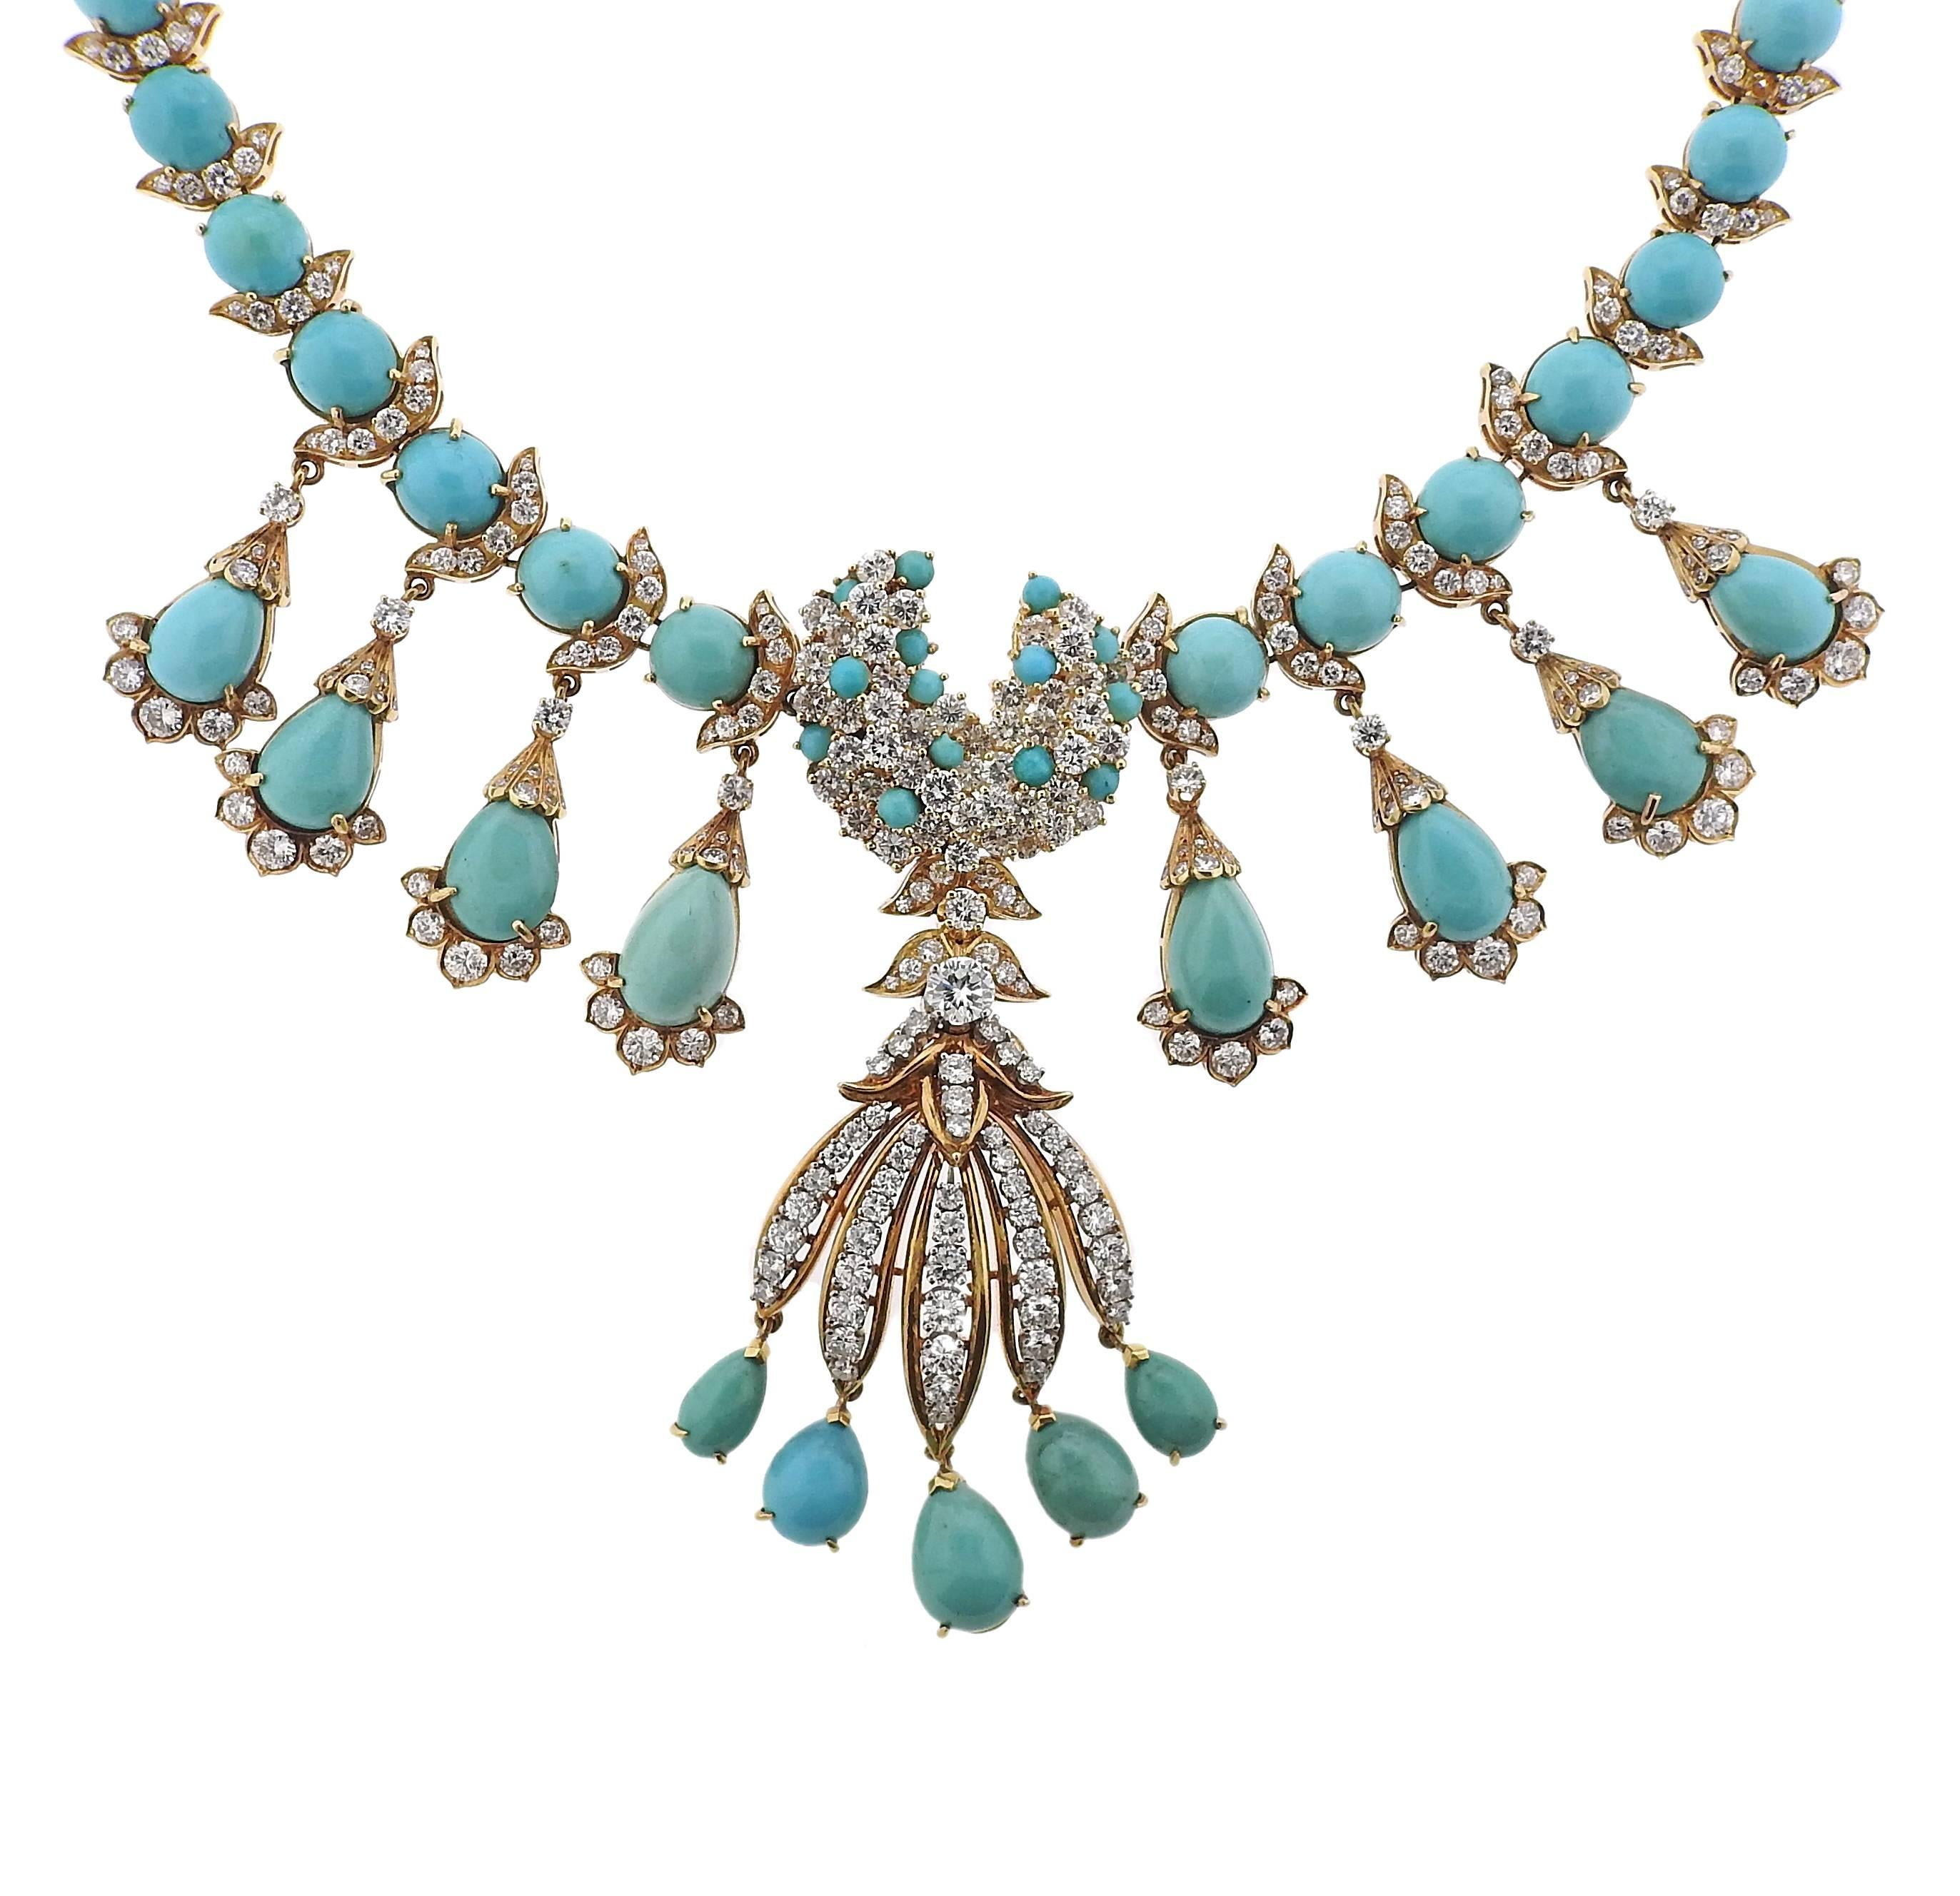 Gorgeous 18k yellow gold necklace, 16" long, drops are 45mm long; set with turquoise and approximately 6.00 - 6.50ctw in diamonds, featuring versatile detachable drop pendant, that can also be worn as a brooch - measuring 78mm x 30mm, set with